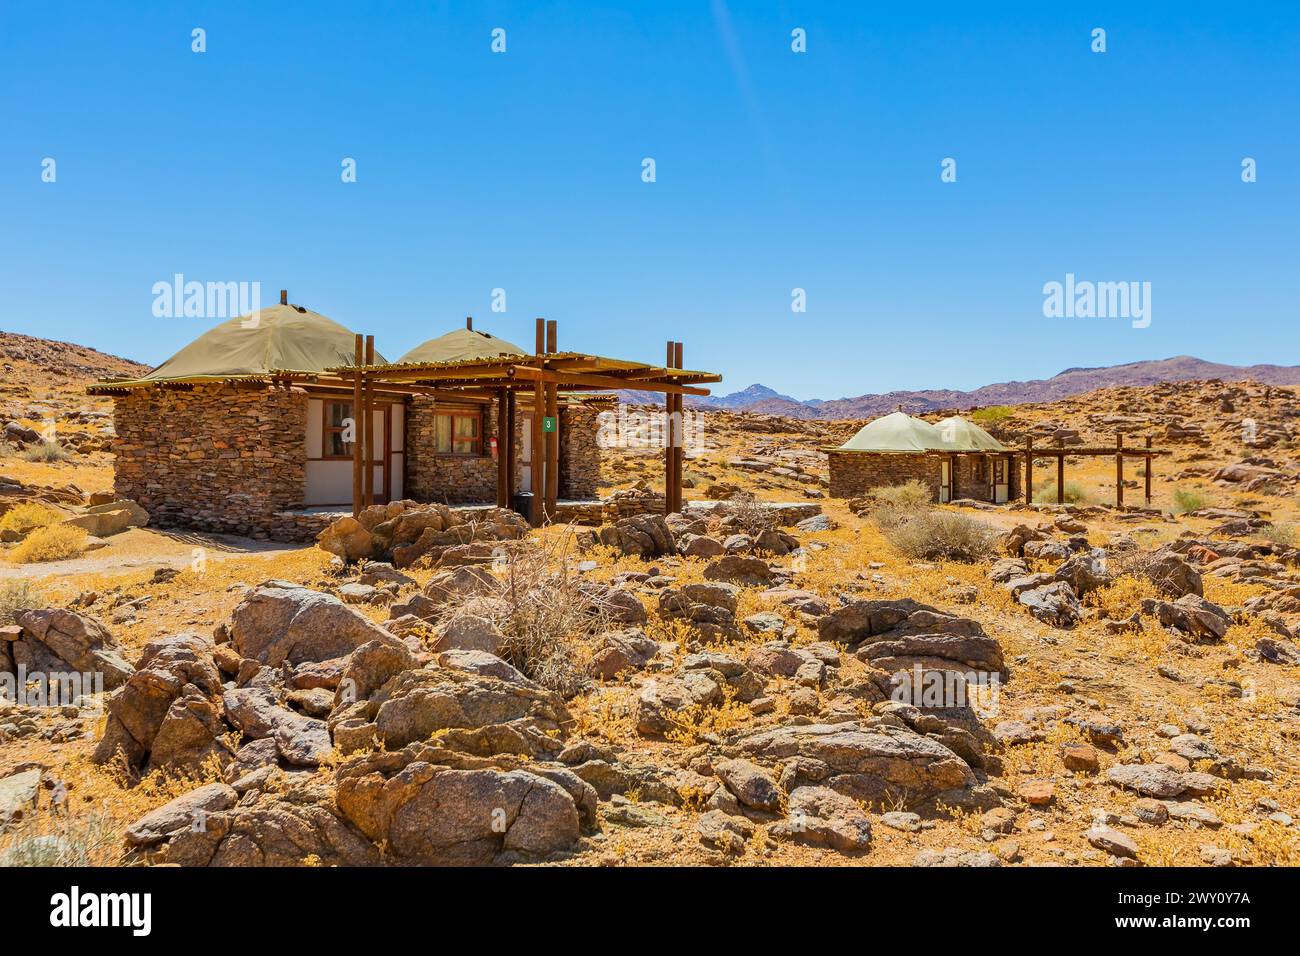 Rustic accommodation in the Richtersveld National Park, arid area of South Africa Stock Photo